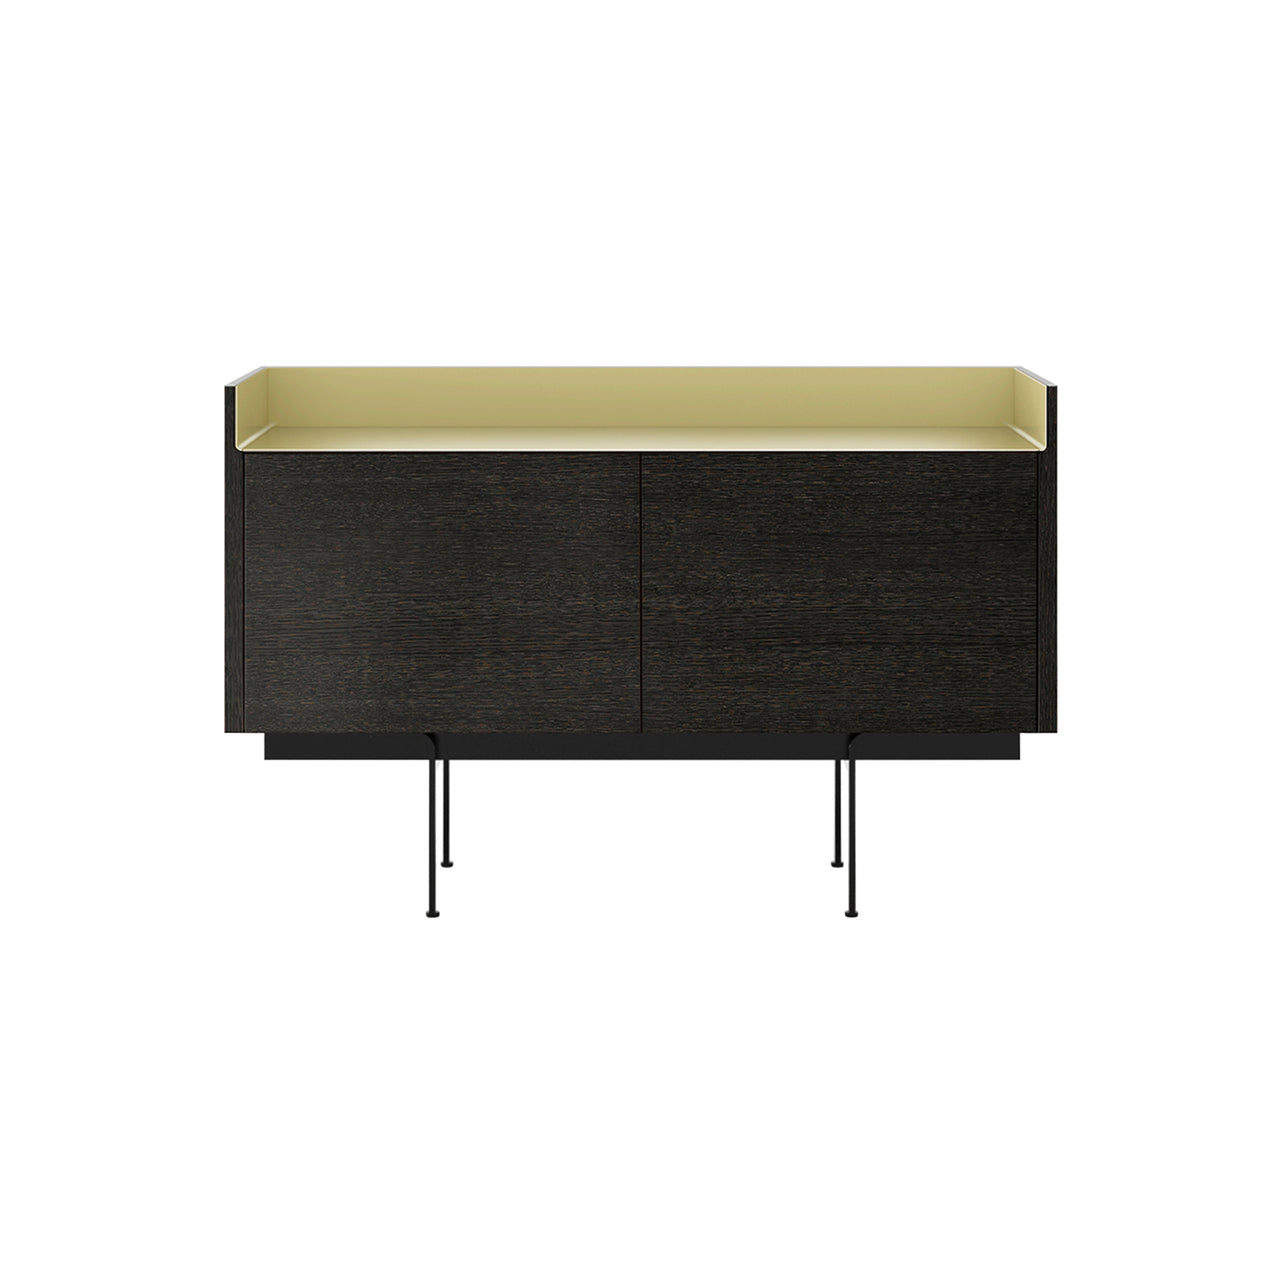 Stockholm Sideboard: STH201 + Dark Grey Stained Oak + Anodized Aluminum Gold + Black